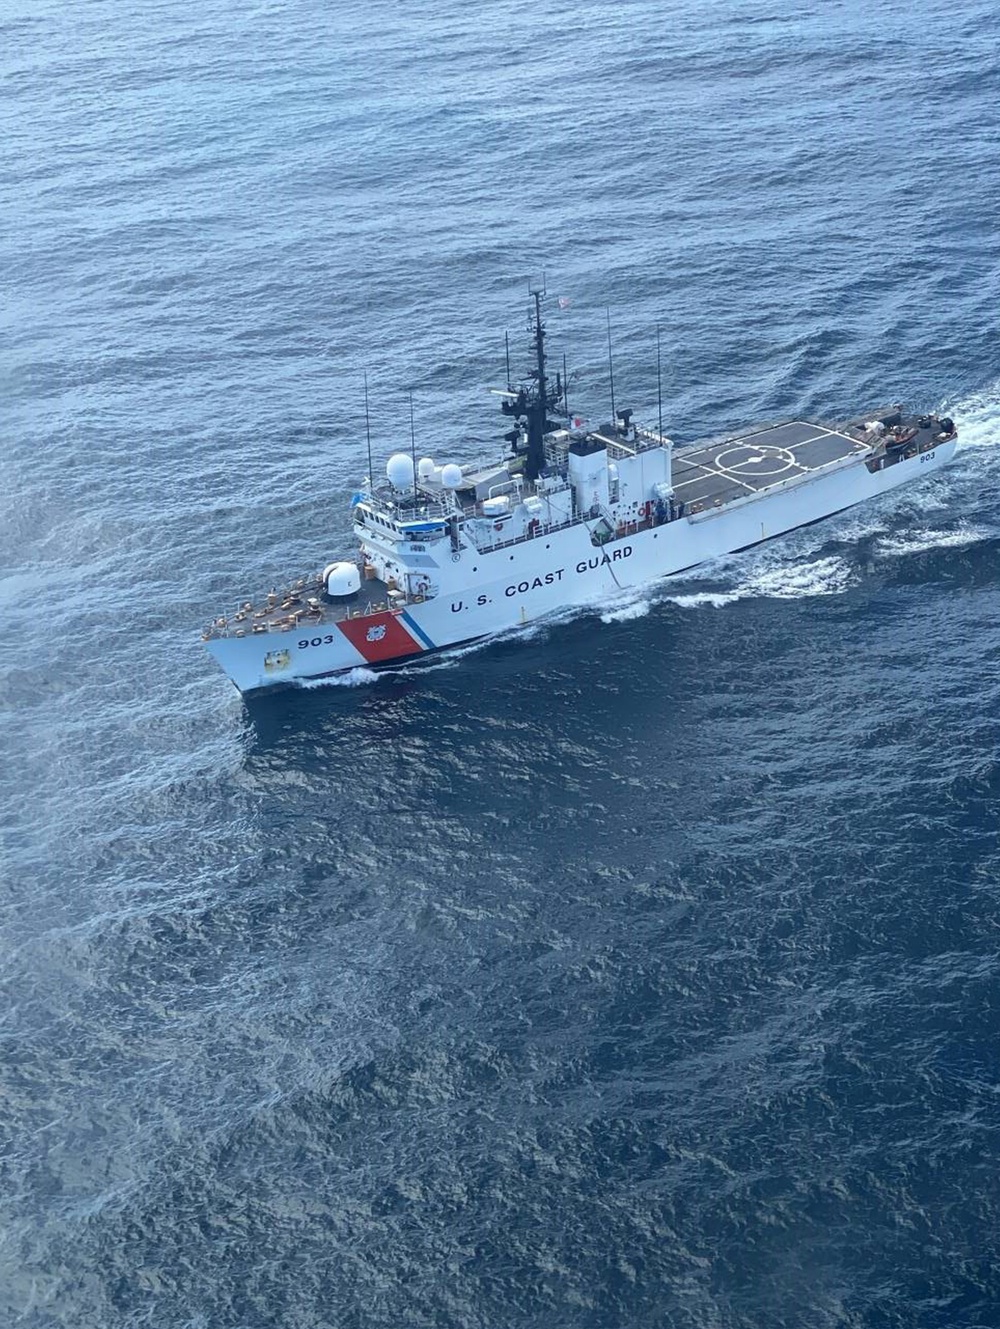 Coast Guard Cutter Harriet Lane returns to home-port after 71-day patrol